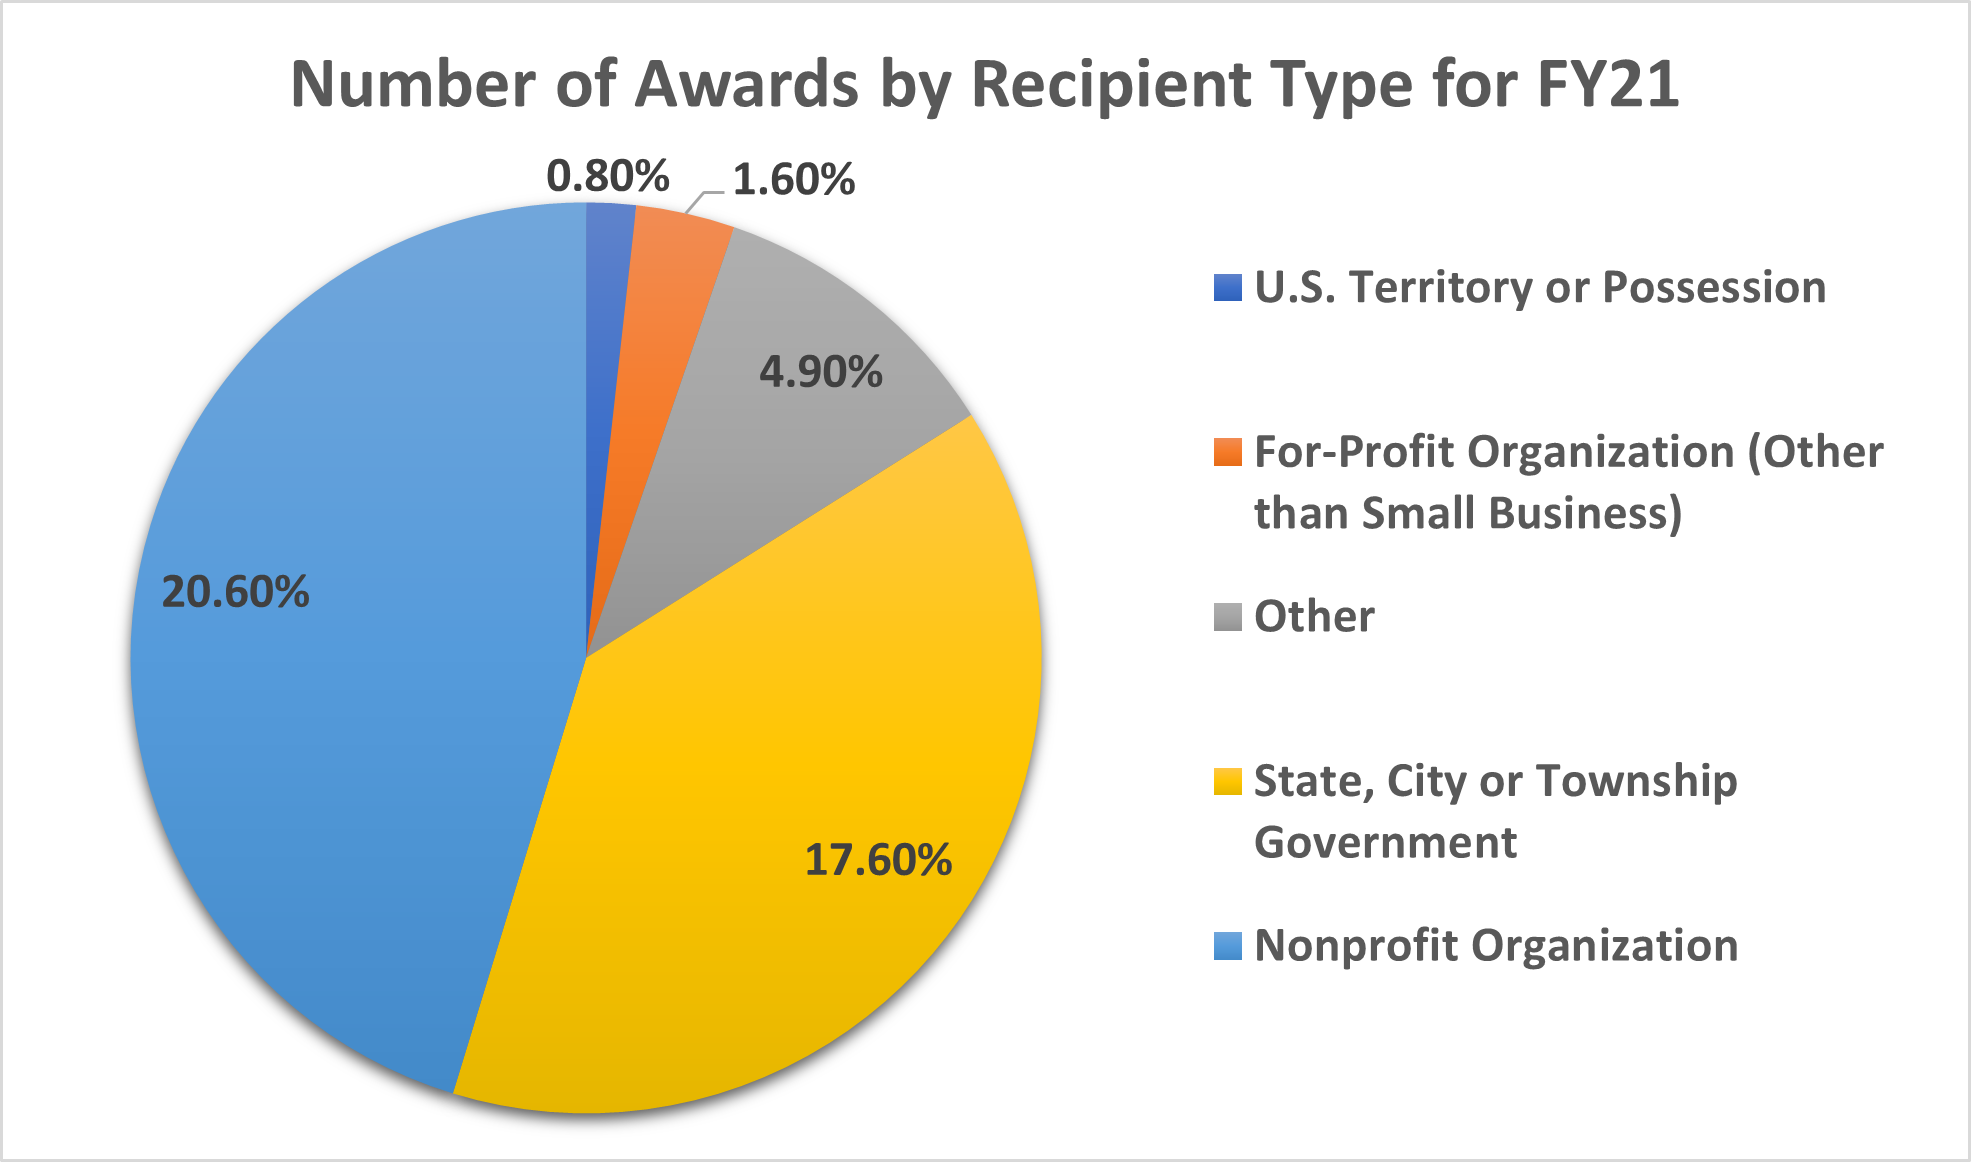 Pie Chart showing Number of Financial Assistance Awards by Recipient Type for FY21: 1.6% For-Profit Organization (other than Small Business); 17.6% State, City or Township Government; 54.5% Institution of Higher Education ; 20.6% Nonprofit Organizations; 4.9% Other ; 0.8% U.S. Territory or Possession